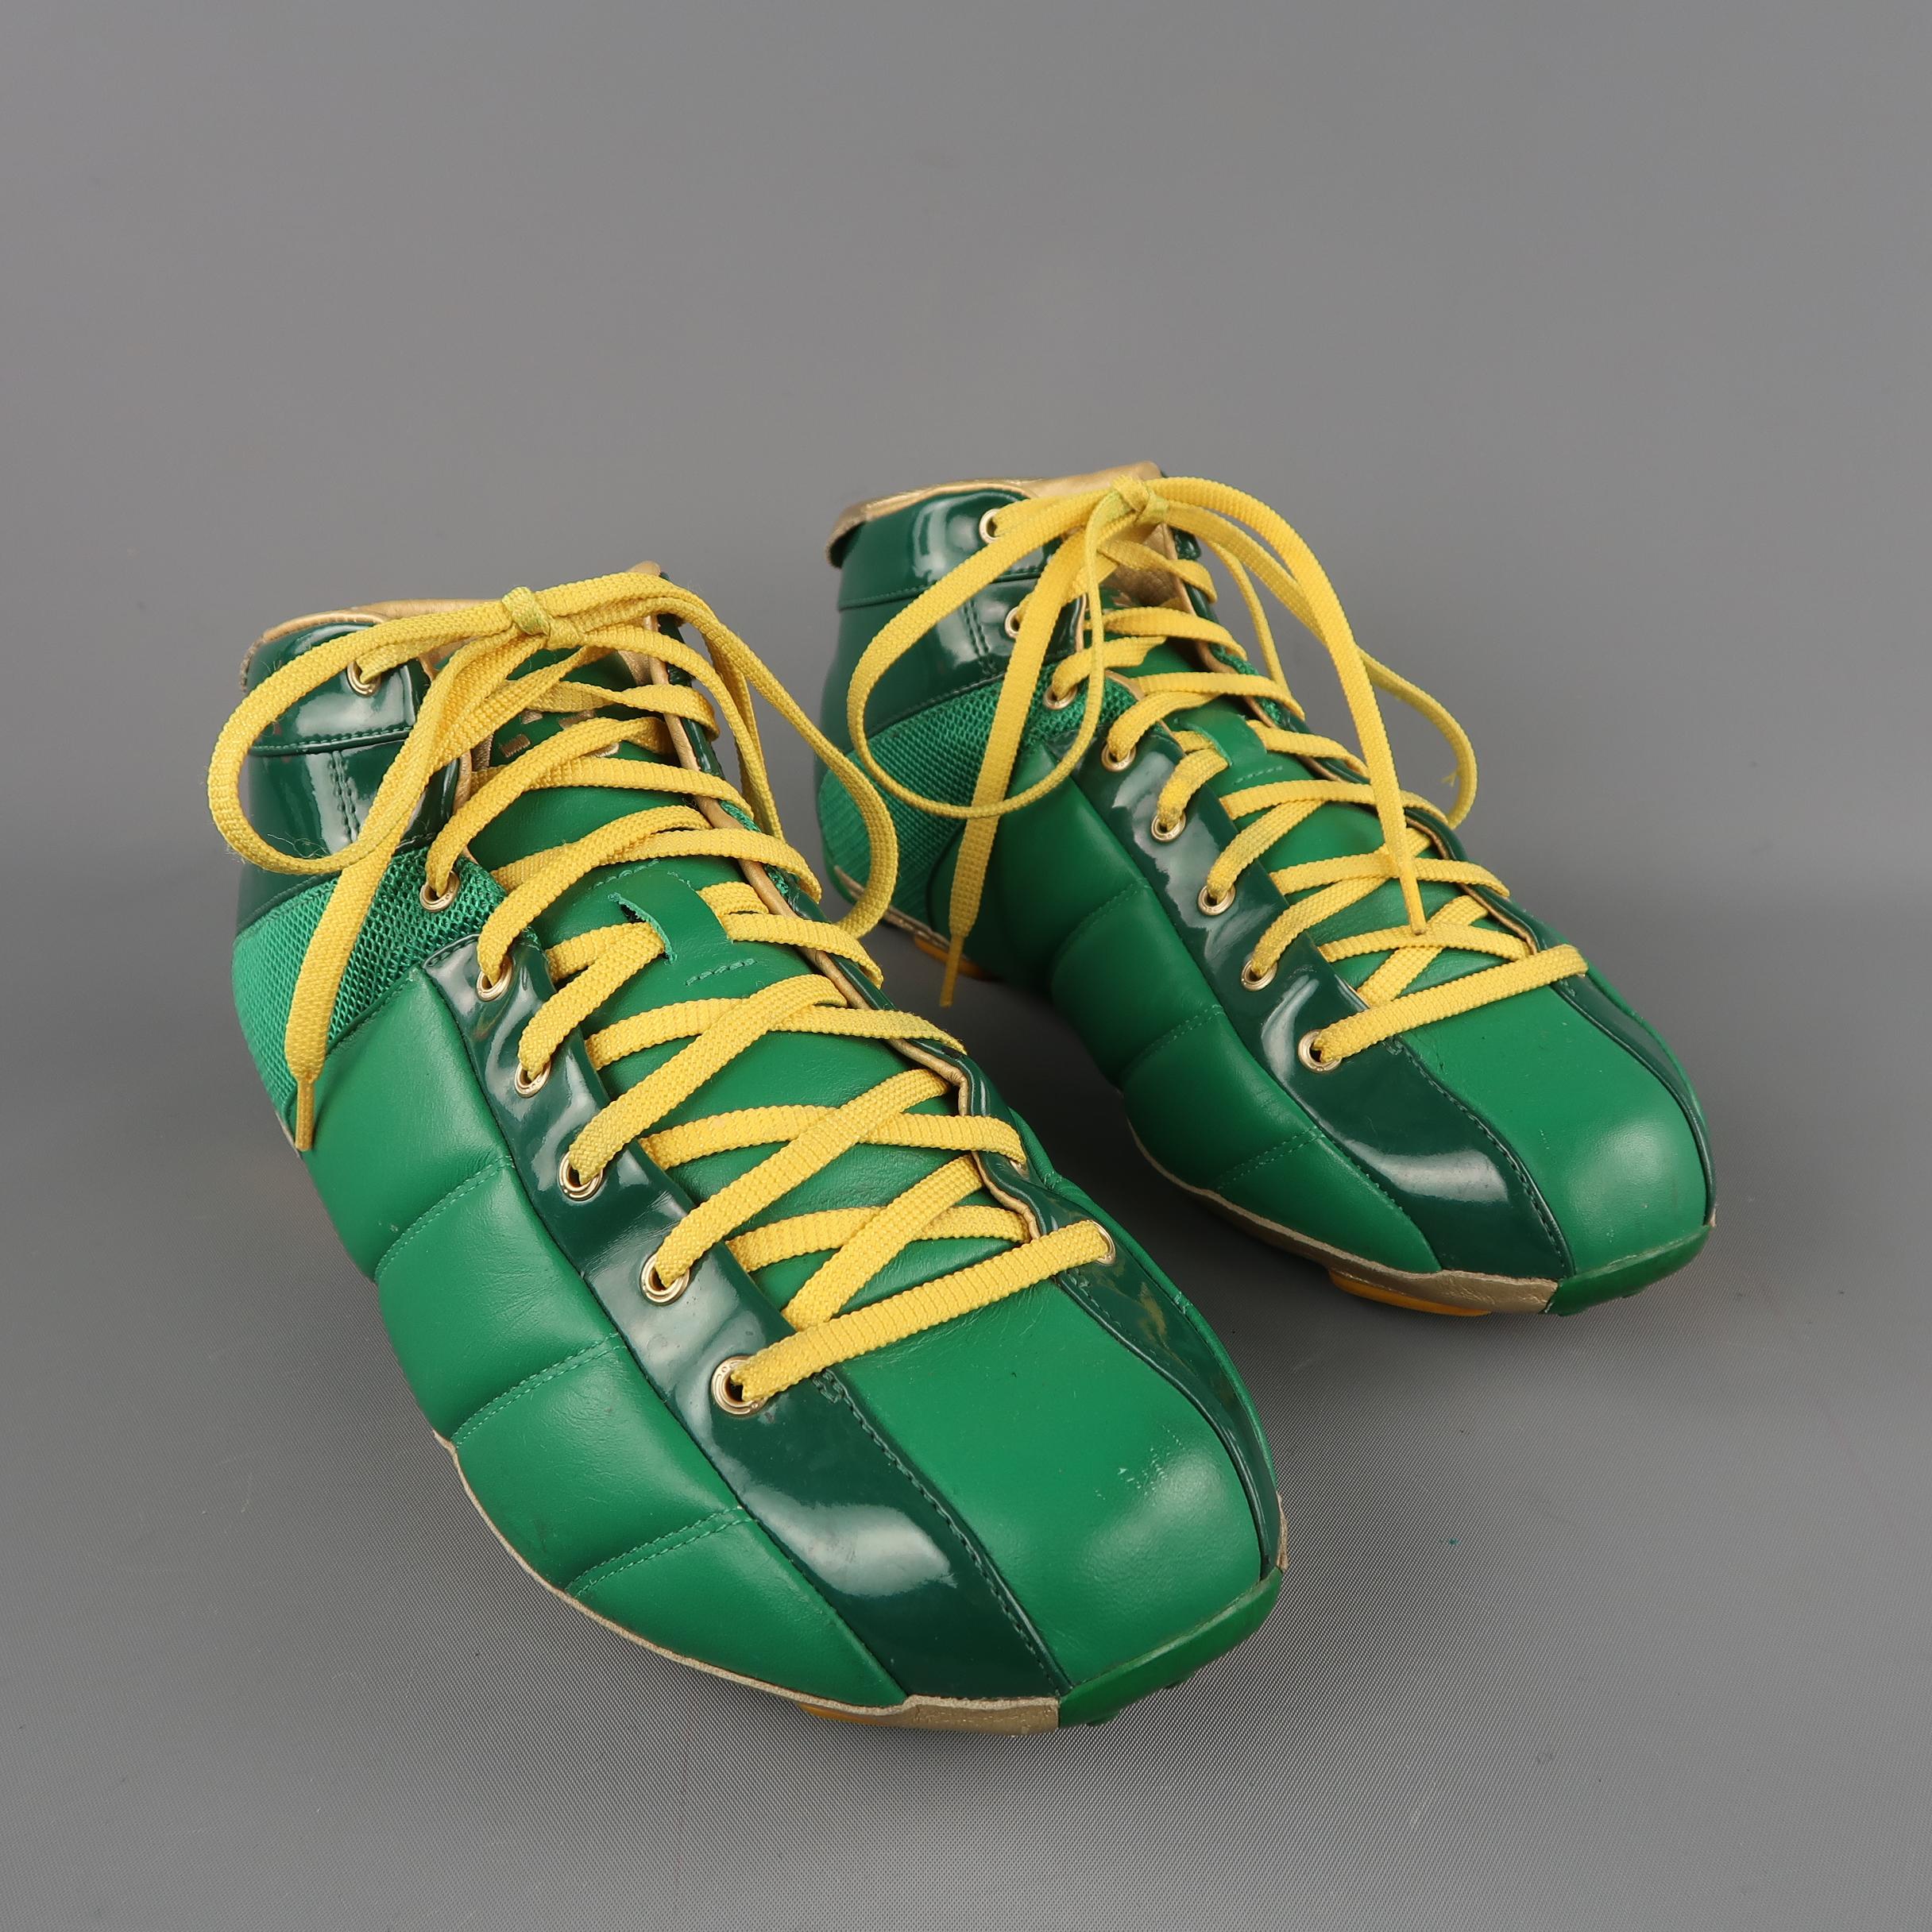 Y-3  sneakers come in green tones, with golden and yellow details and high top.
 
Excellent Pre-Owned Condition.
Marked: 7.5 US
 
Measurements:
Outsole: 11 x 2.5 in.